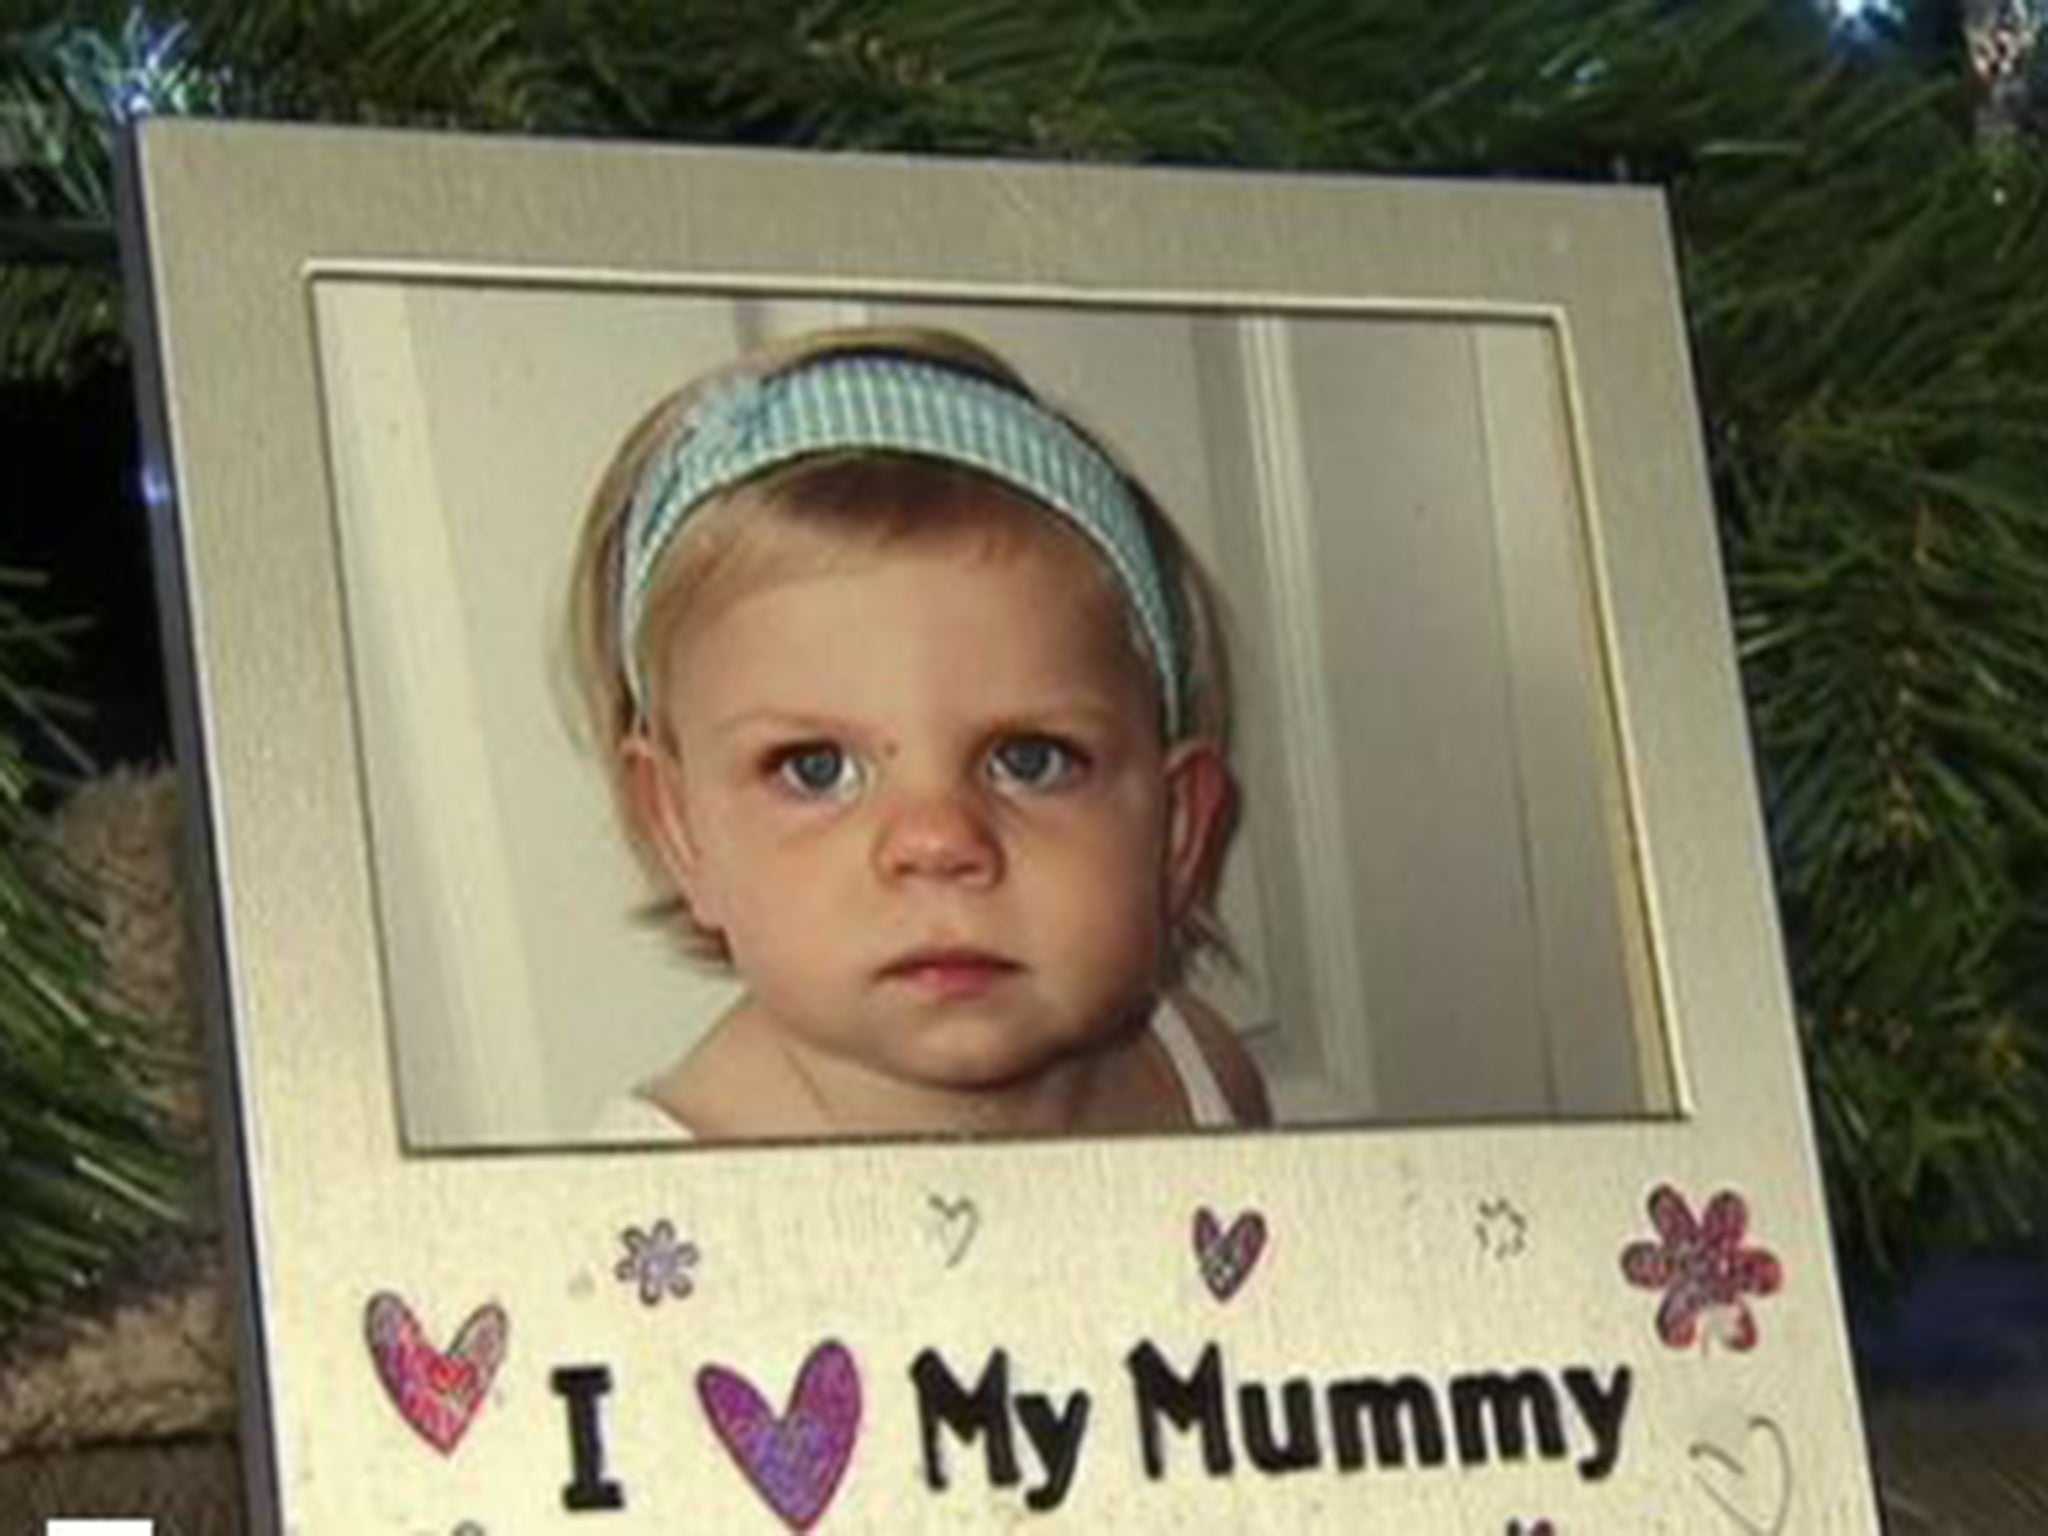 Chloe McCance, who had the rare degenerative illness, Batten's Disease, died earlier this month after a chest infection